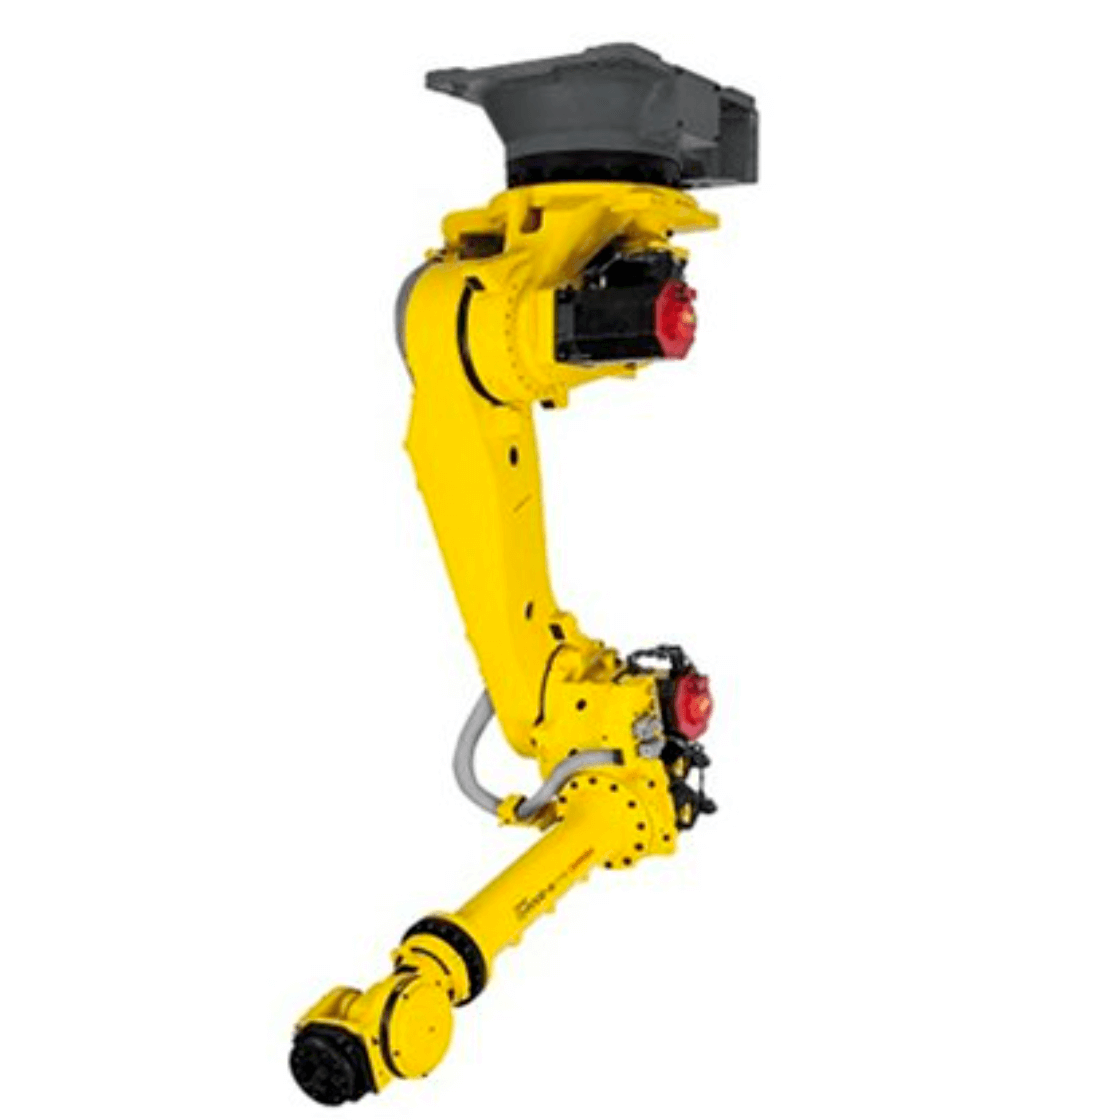 FANUC R-2000iC/165F Industrial Robot Welding 6 Axis Robot China And Handing Robot With R-3OiB/R-3OiB Plus Controller